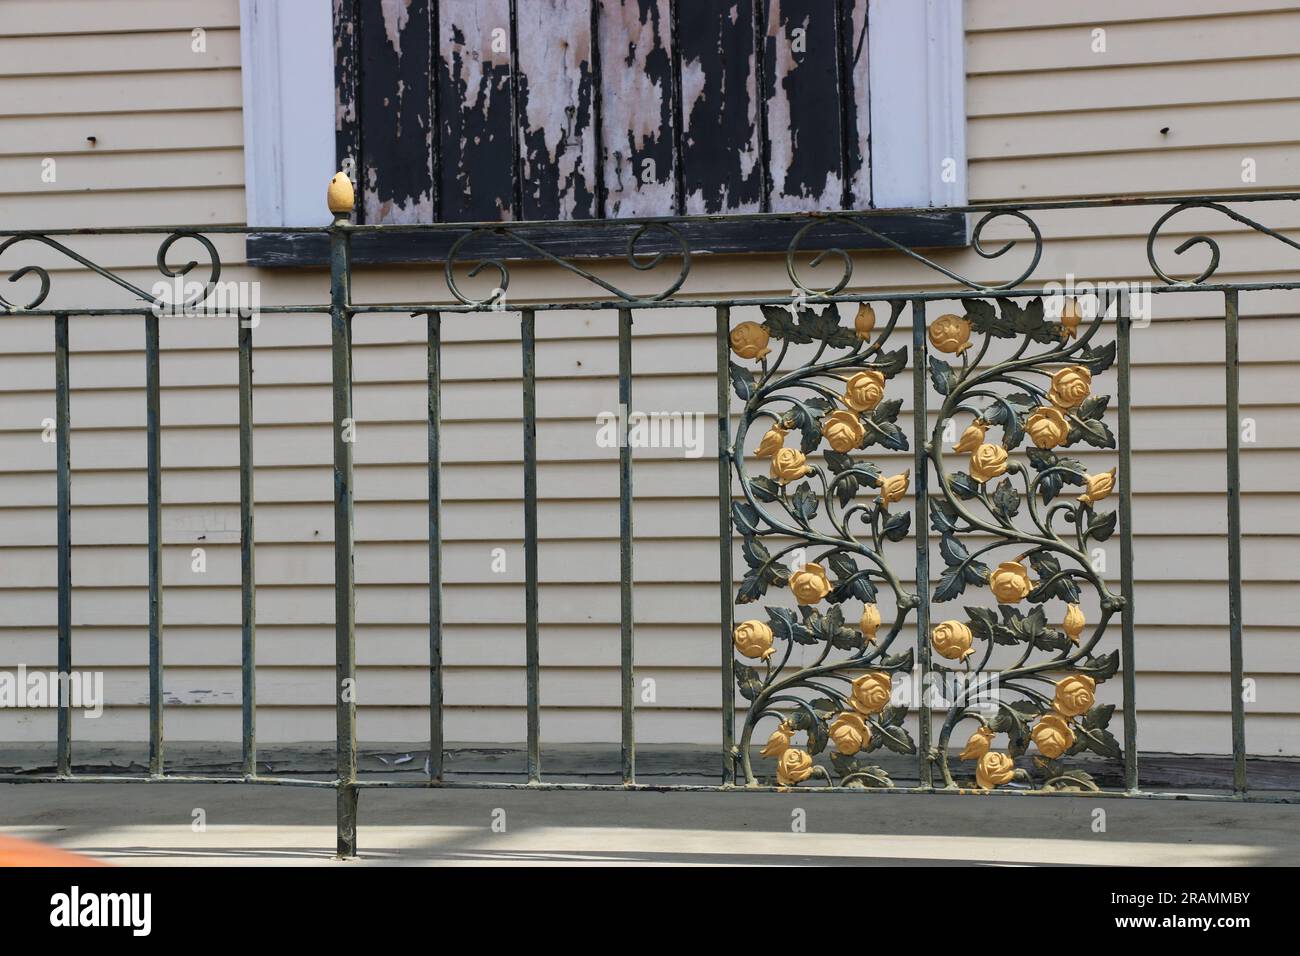 Intricate wrought iron railing with entwined roses in the French Quarter, New Orleans. Stock Photo